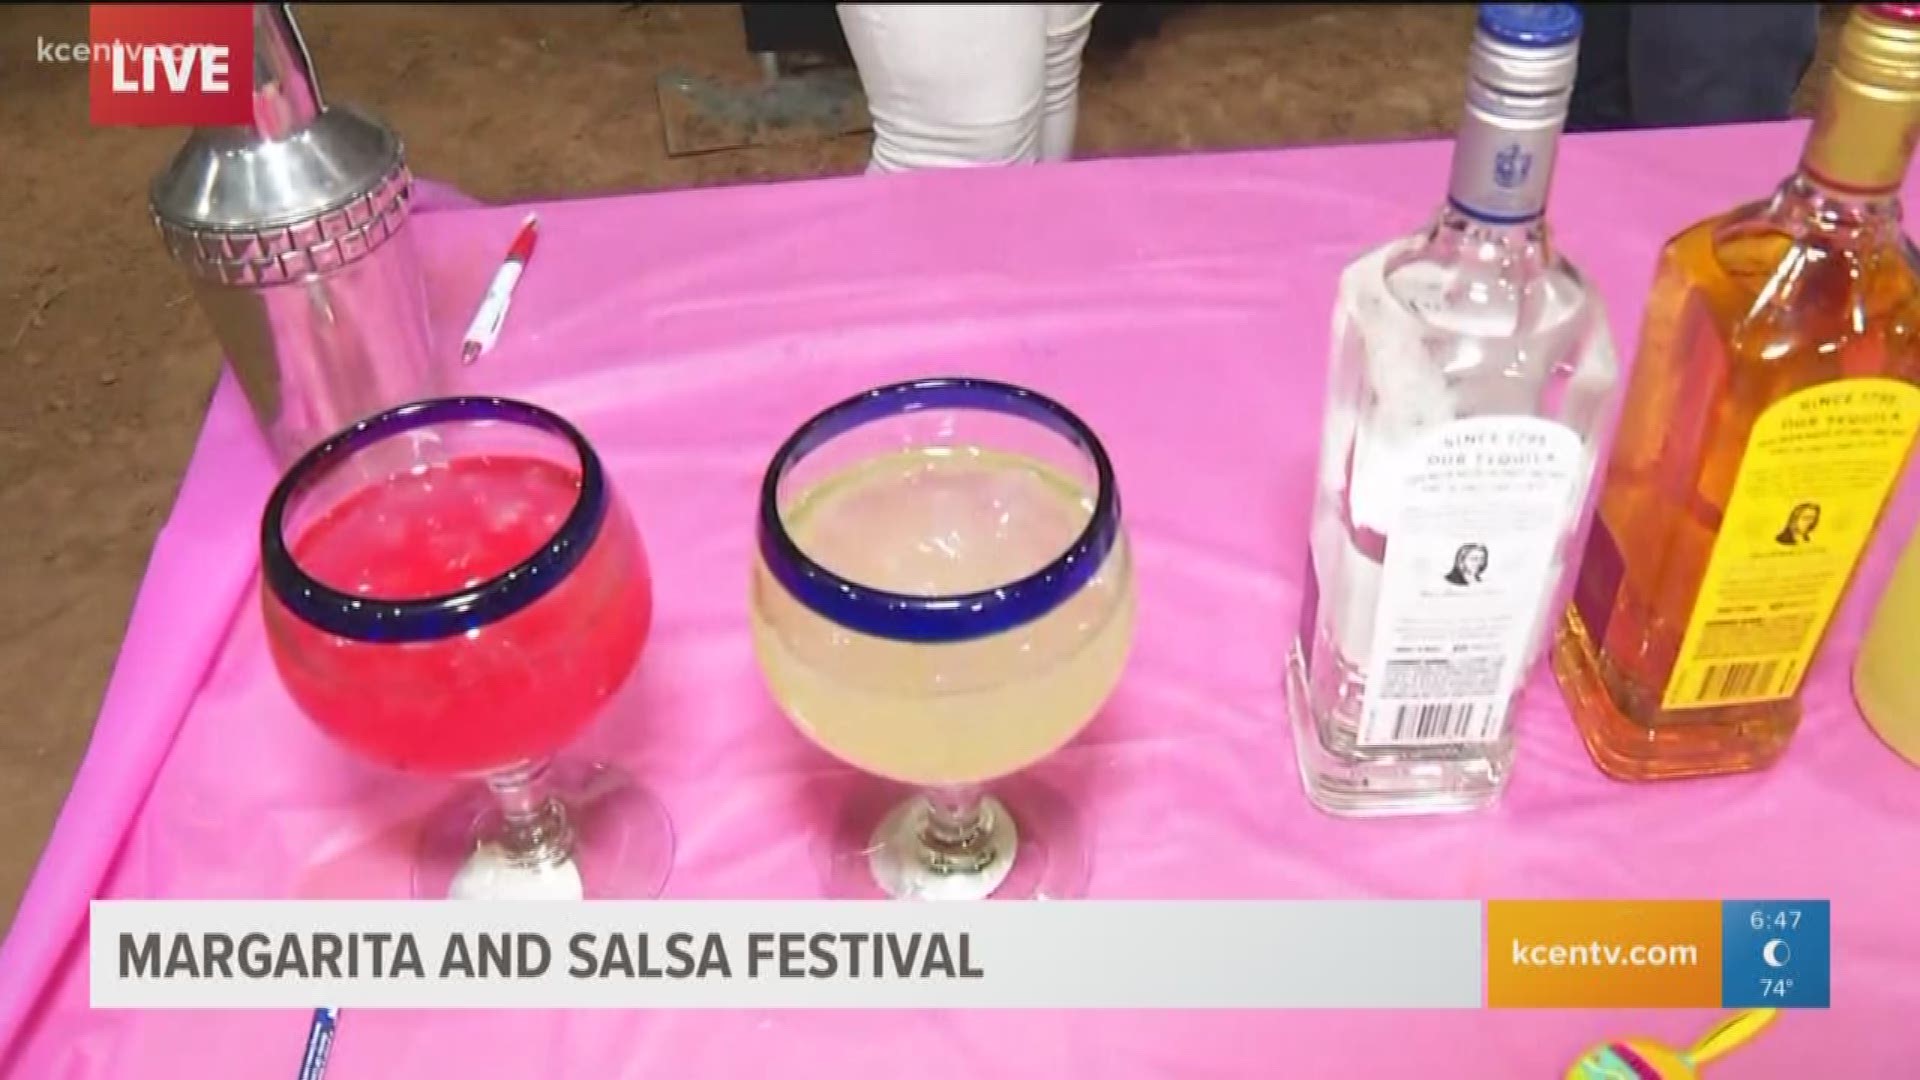 The margarita and salsa festival will have you dancing to some big name